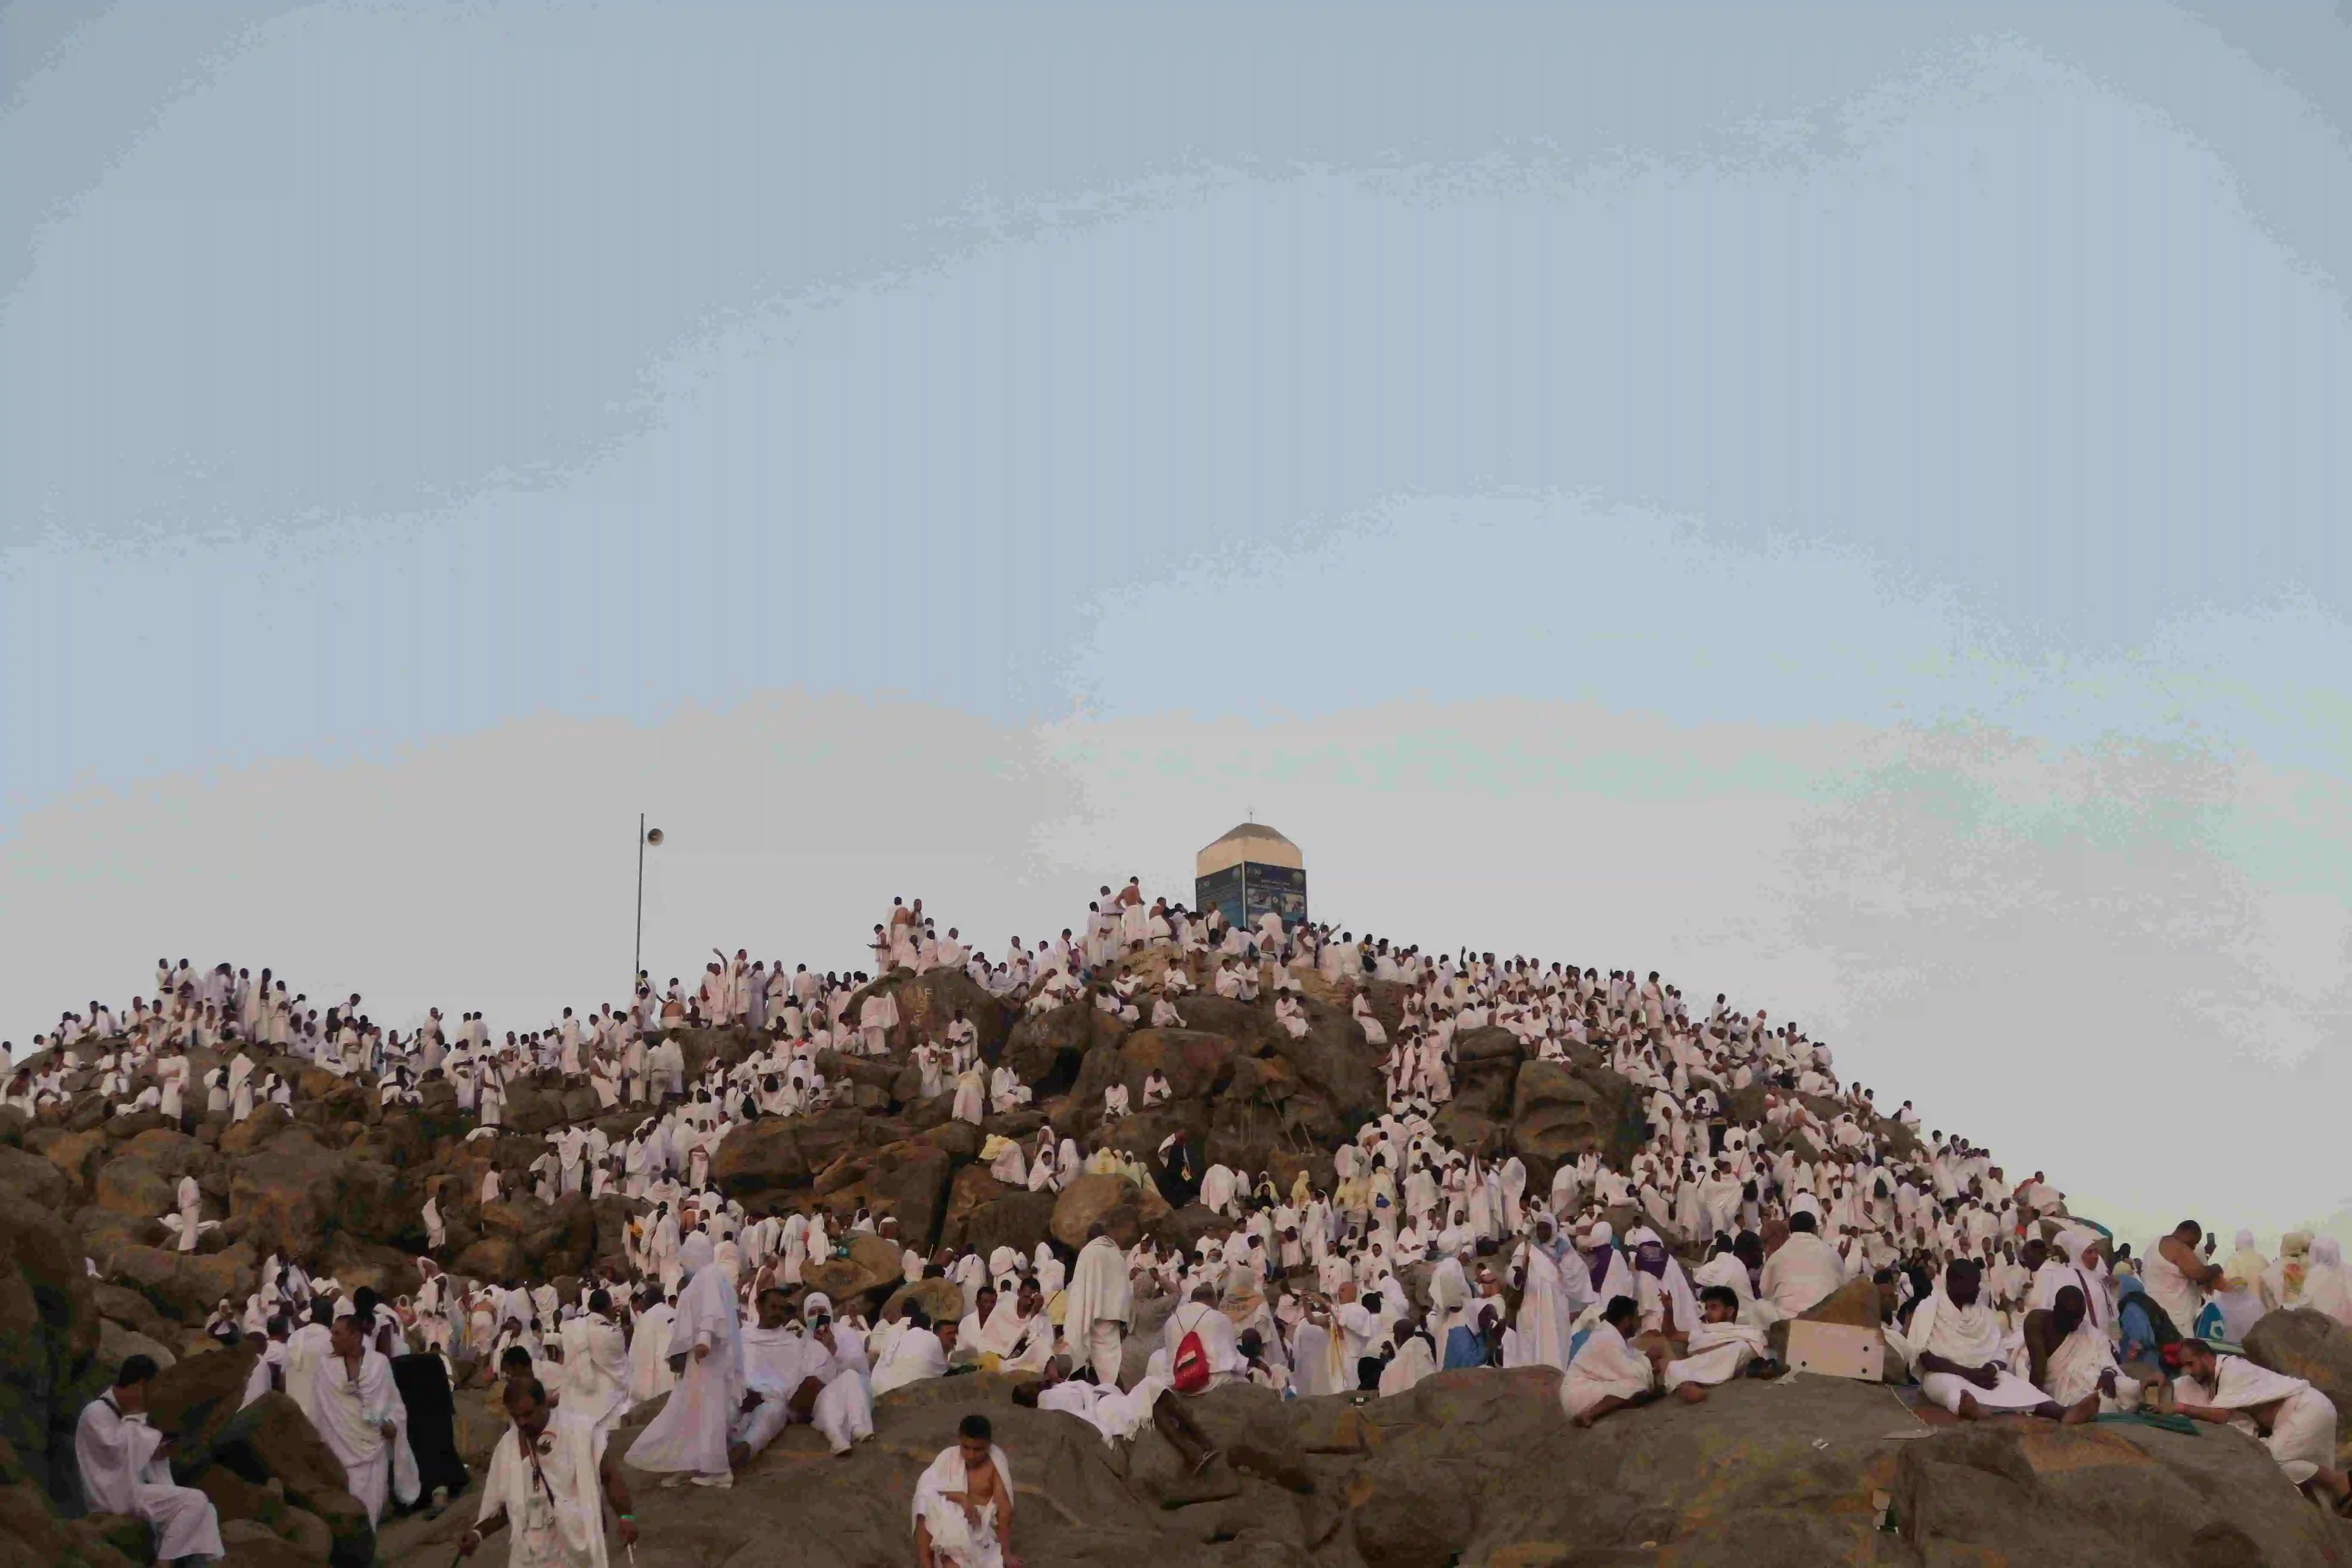 The Day of Arafat - A Moment of Mercy for All Muslims